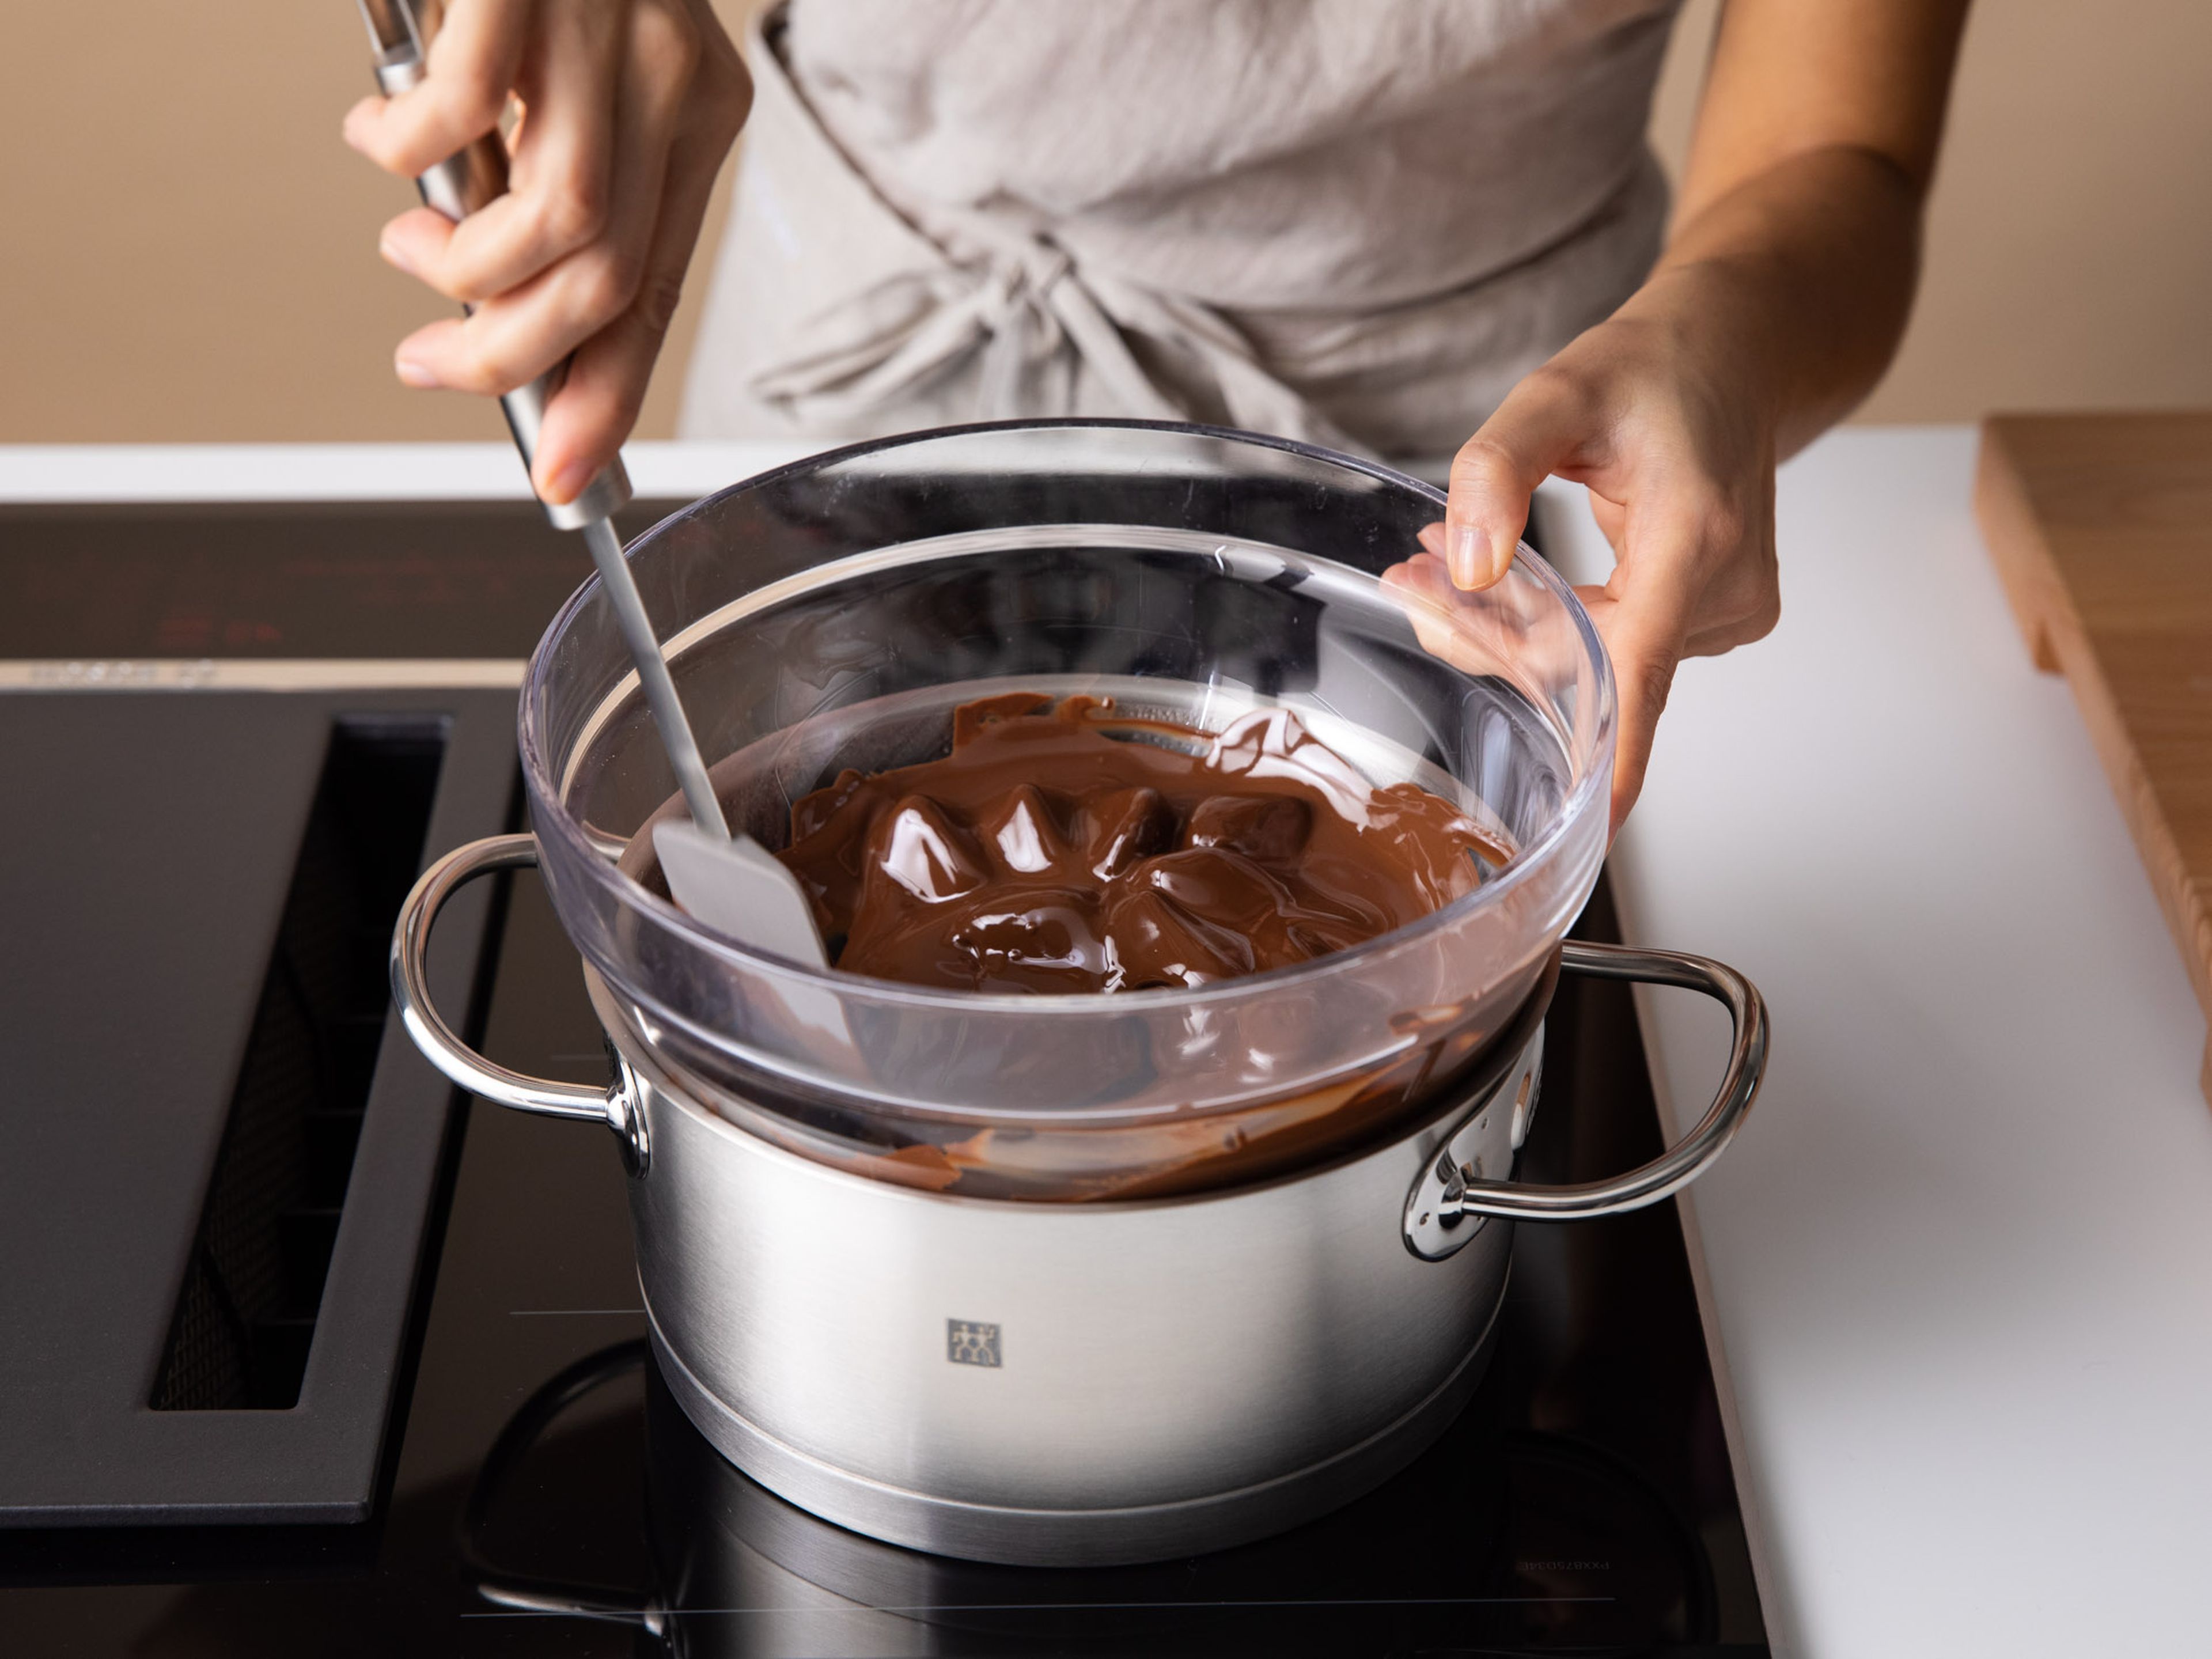 Melt chocolate in a heatproof bowl set over a pot of simmering water.